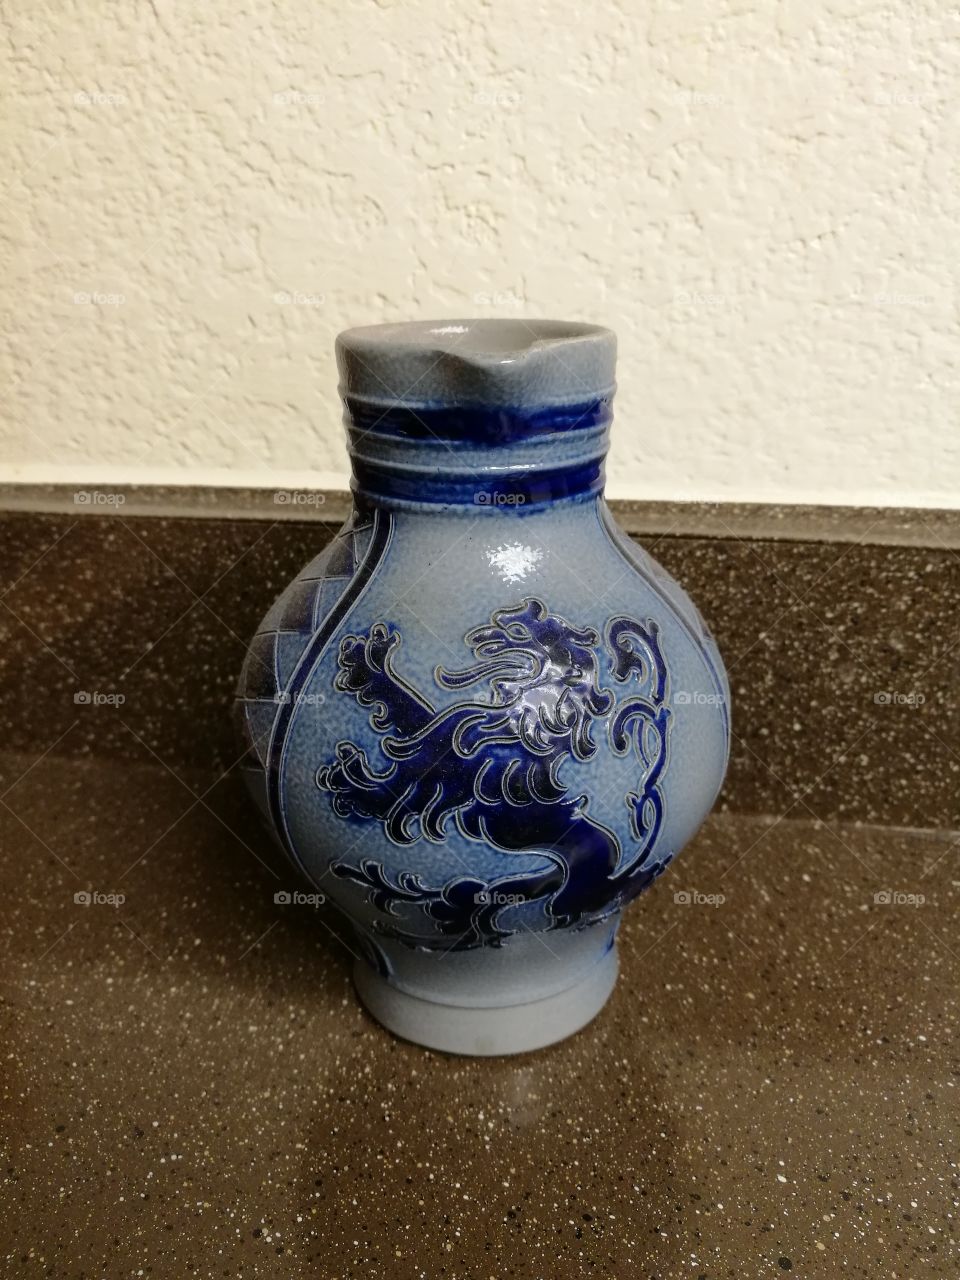 Porcelain vase with beautiful Dragon painting